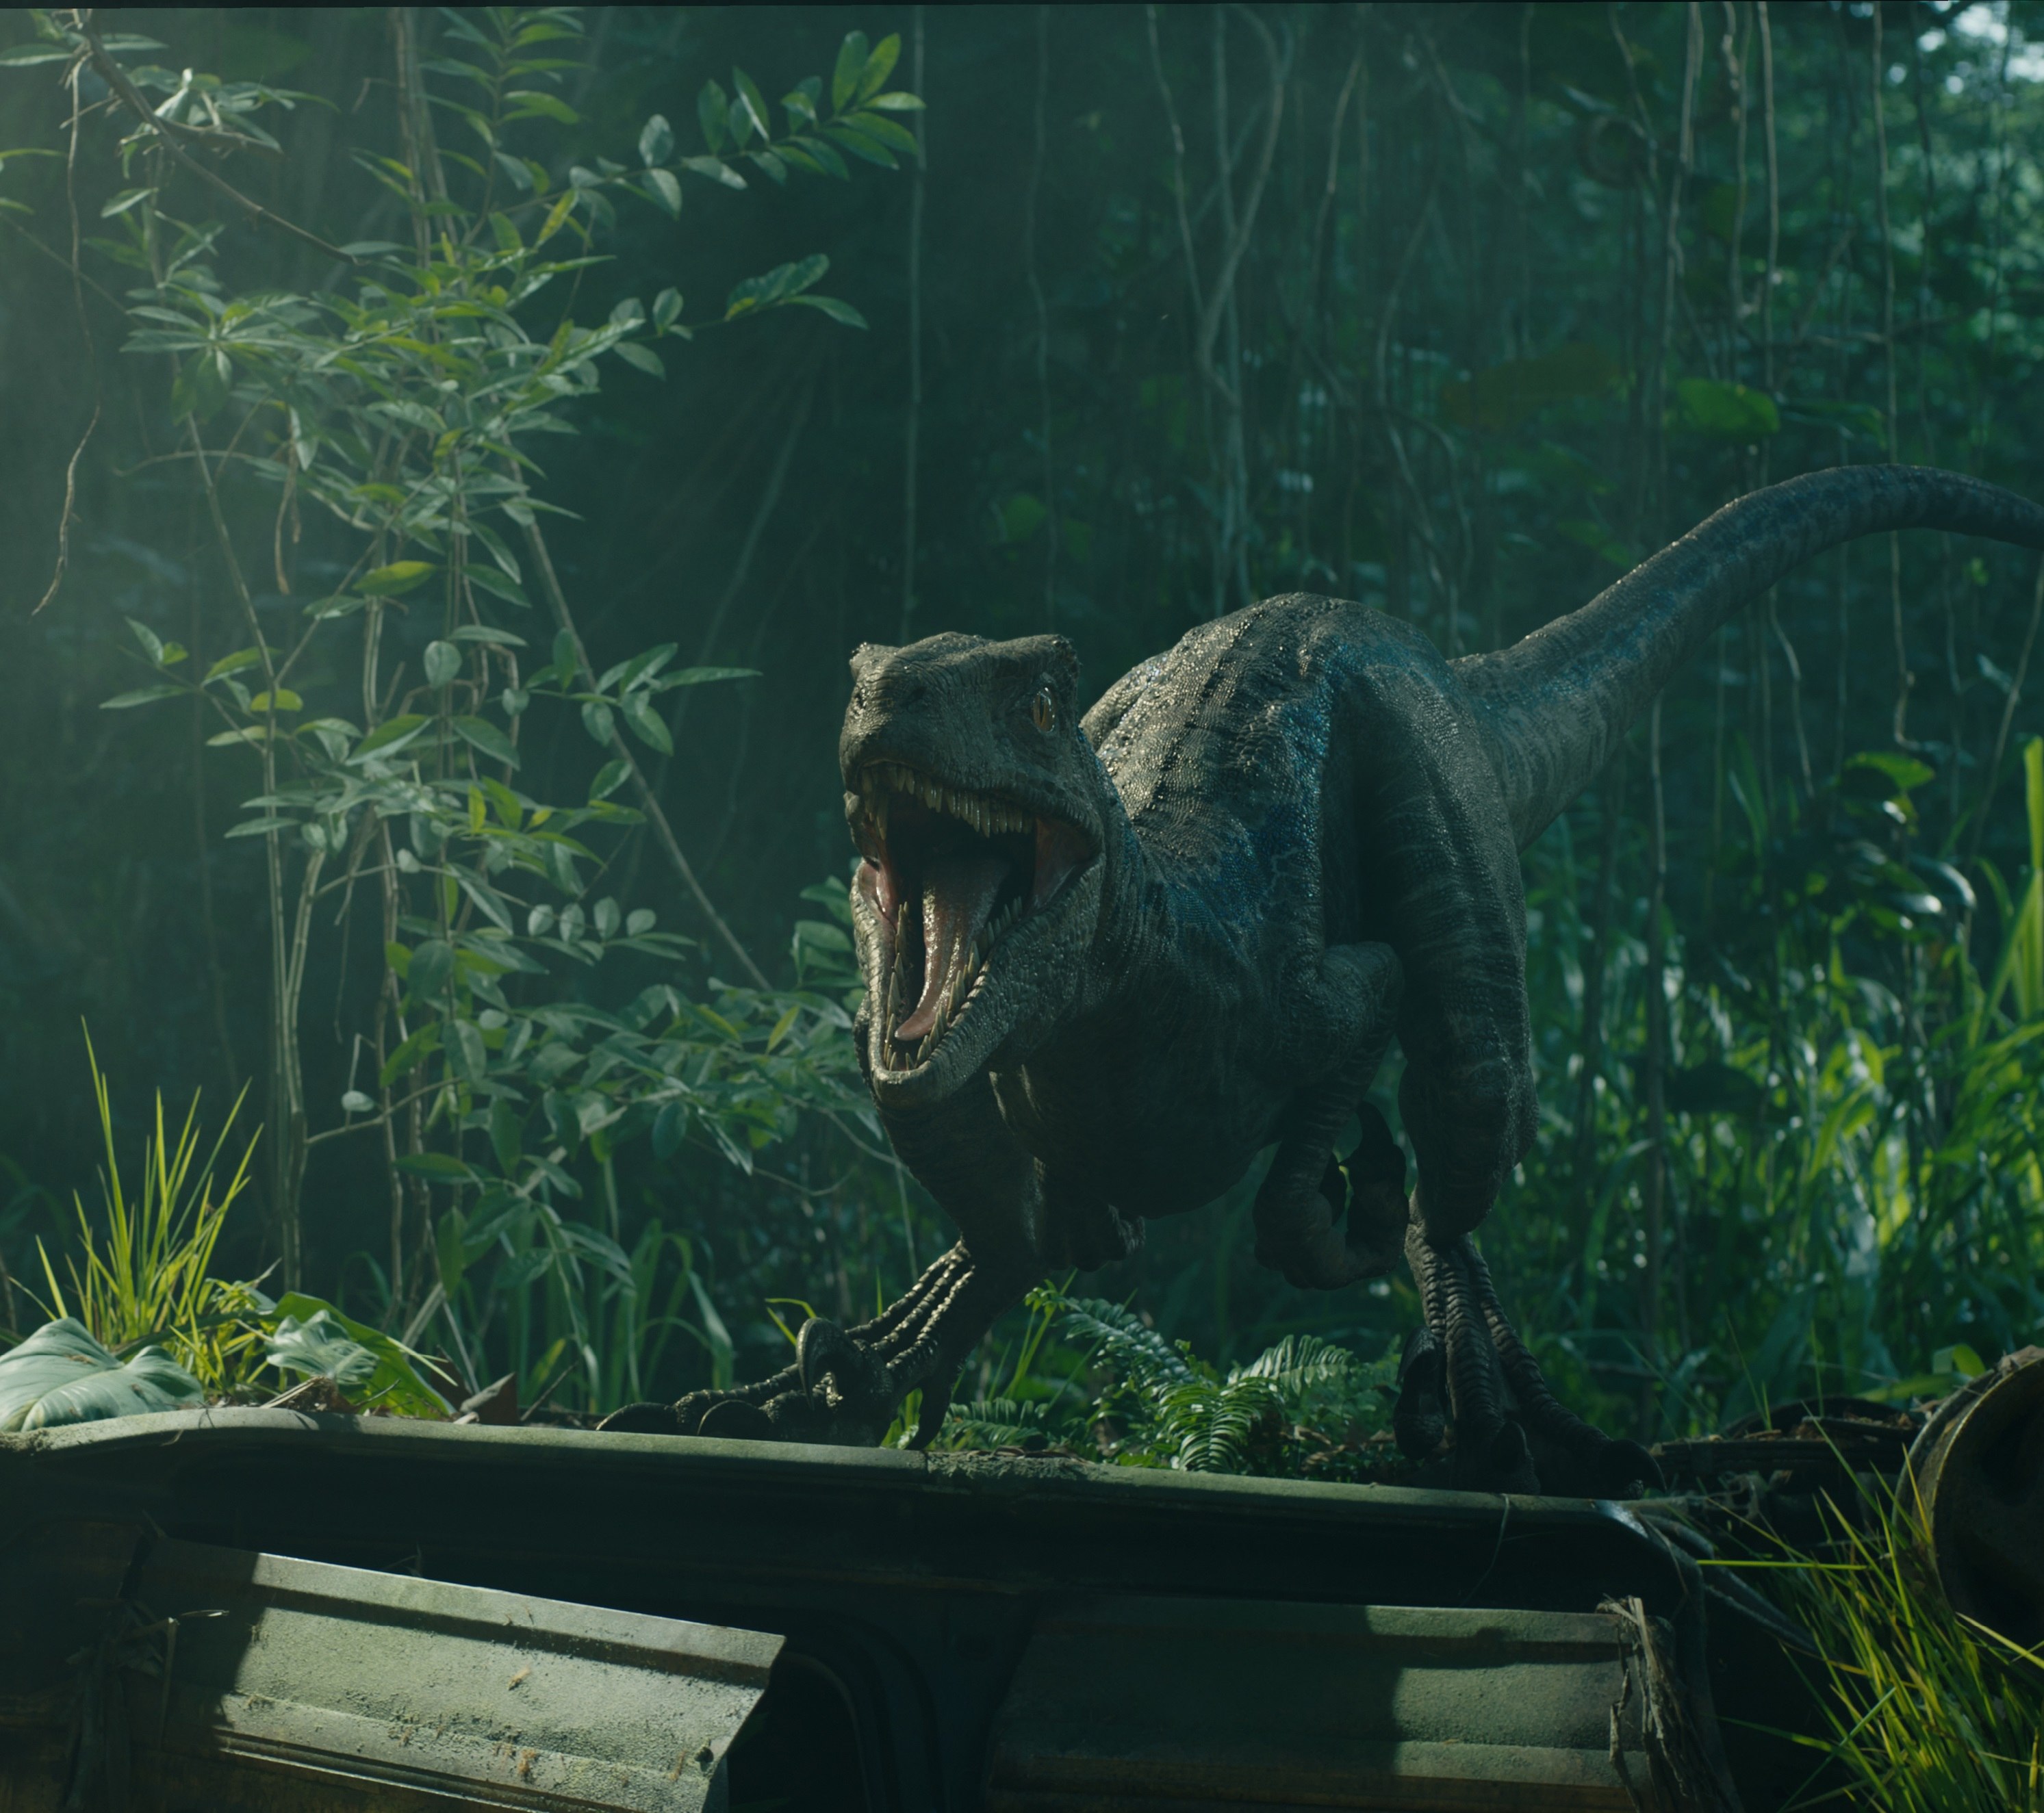 How ILM Blended Practical and Digital Effects for ‘Jurassic World